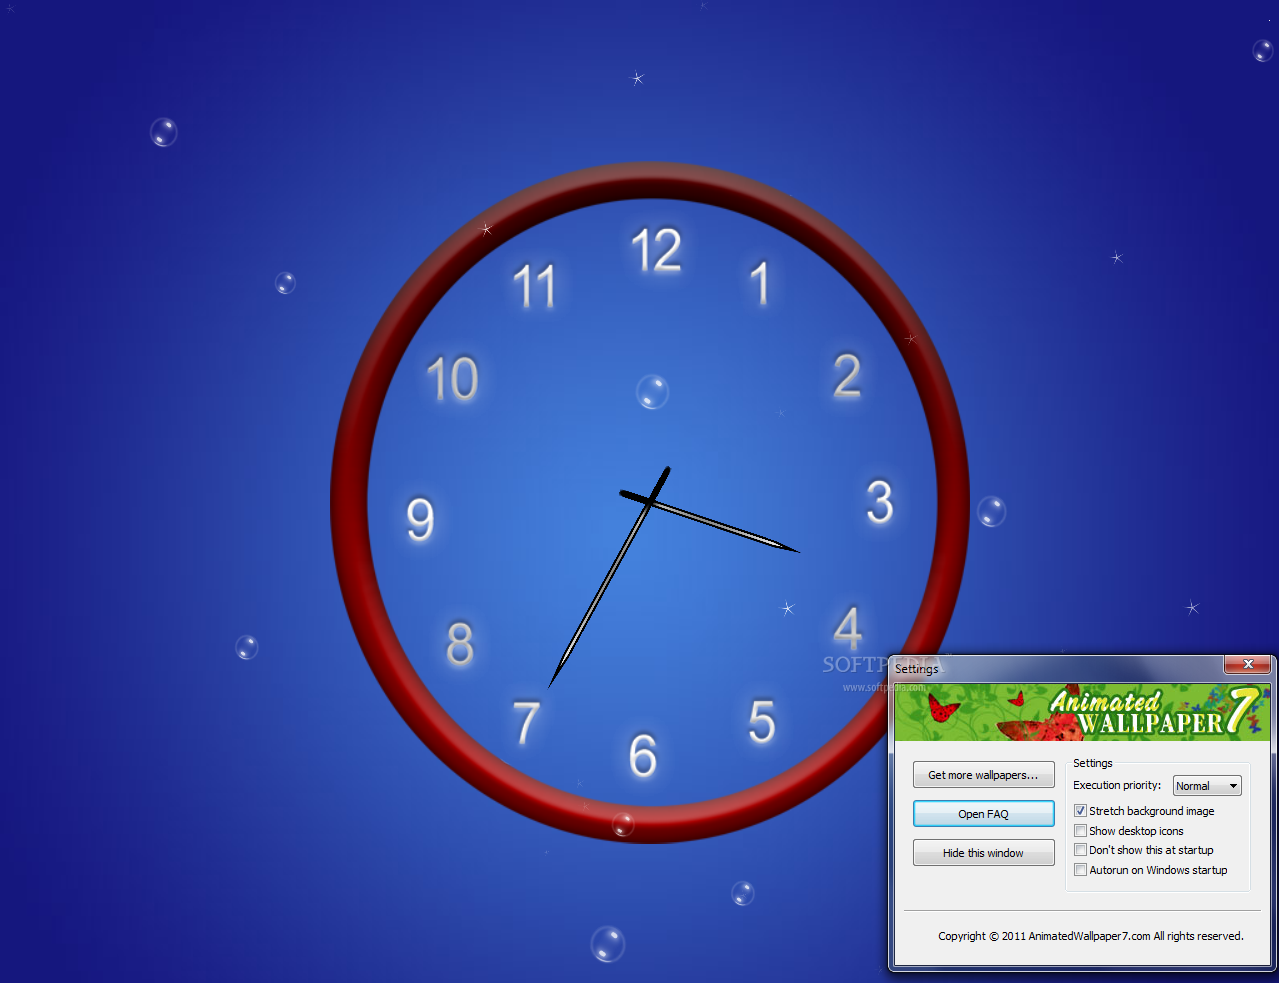 Clock Animated Wallpaper   This is a sample from what the wallpaper